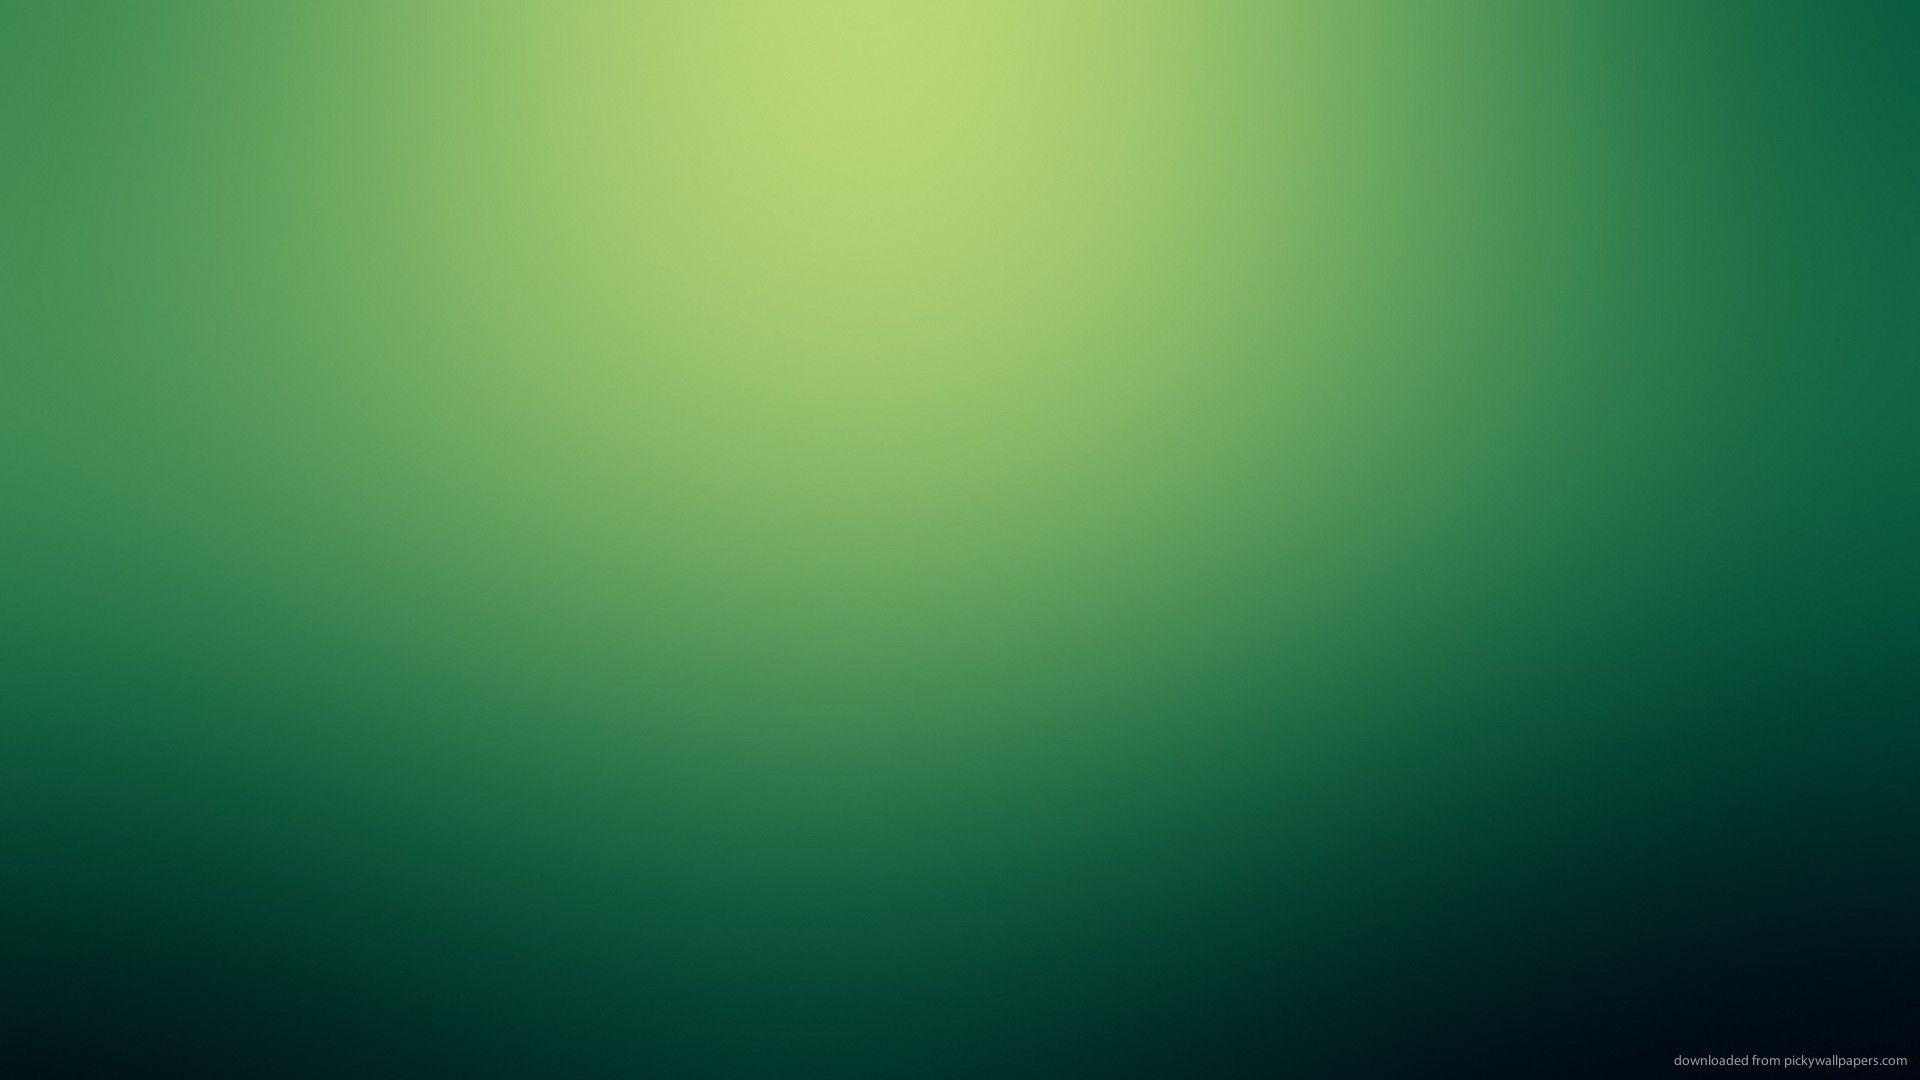 Pure Minimal Simple Green Background iPhone 8 Wallpapers Free Download